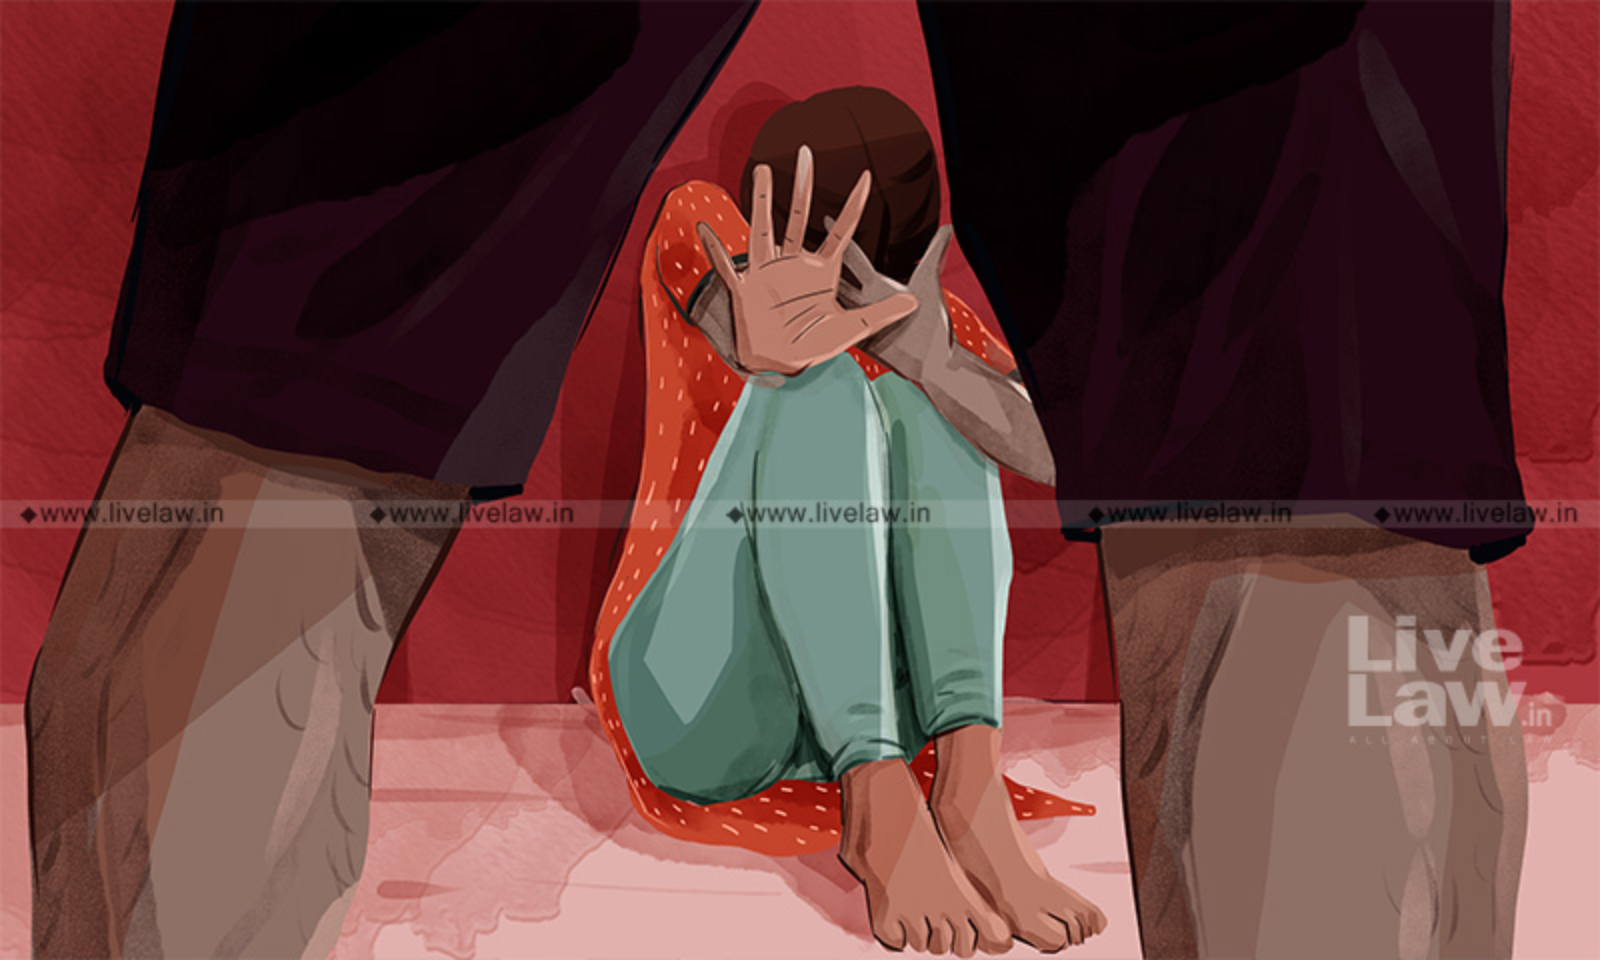 1600px x 960px - Consent, Rape, And Marriage: What Is India Doing?